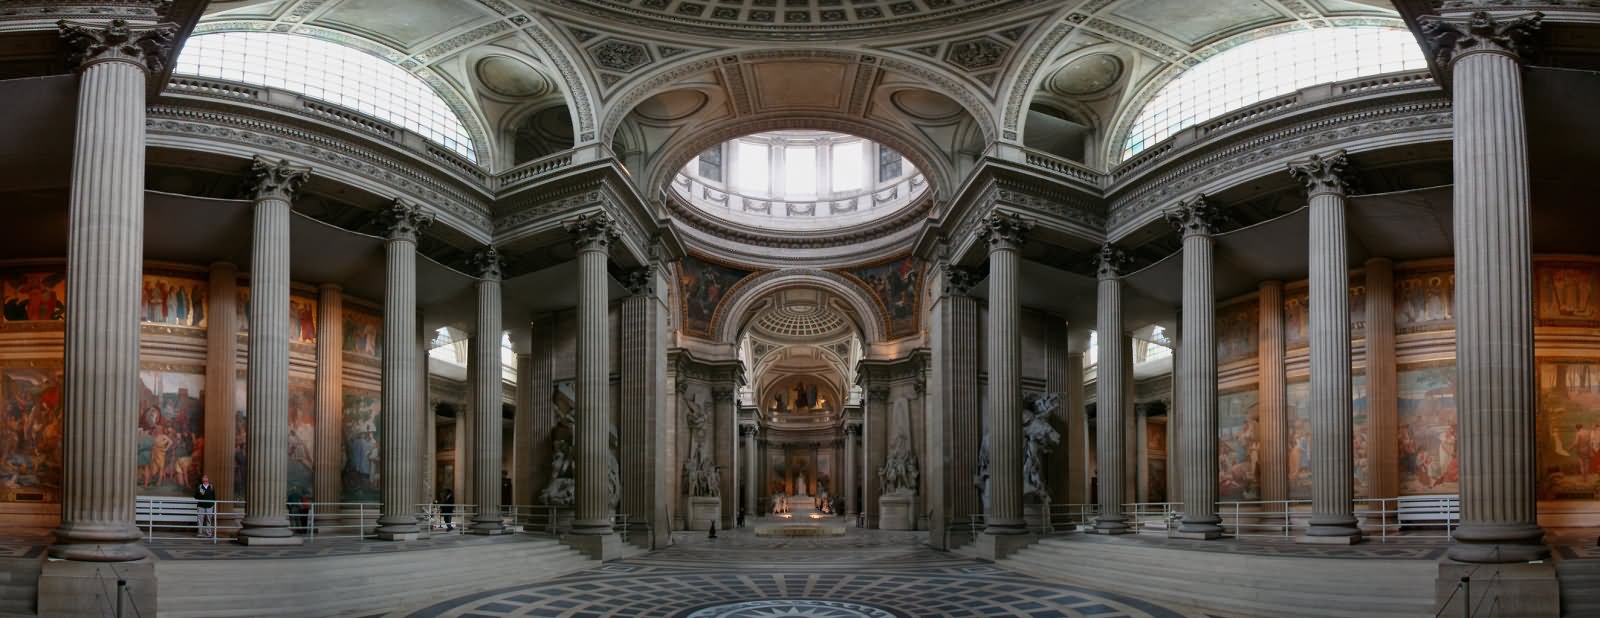 Inside Panoramic View Of The Pantheon